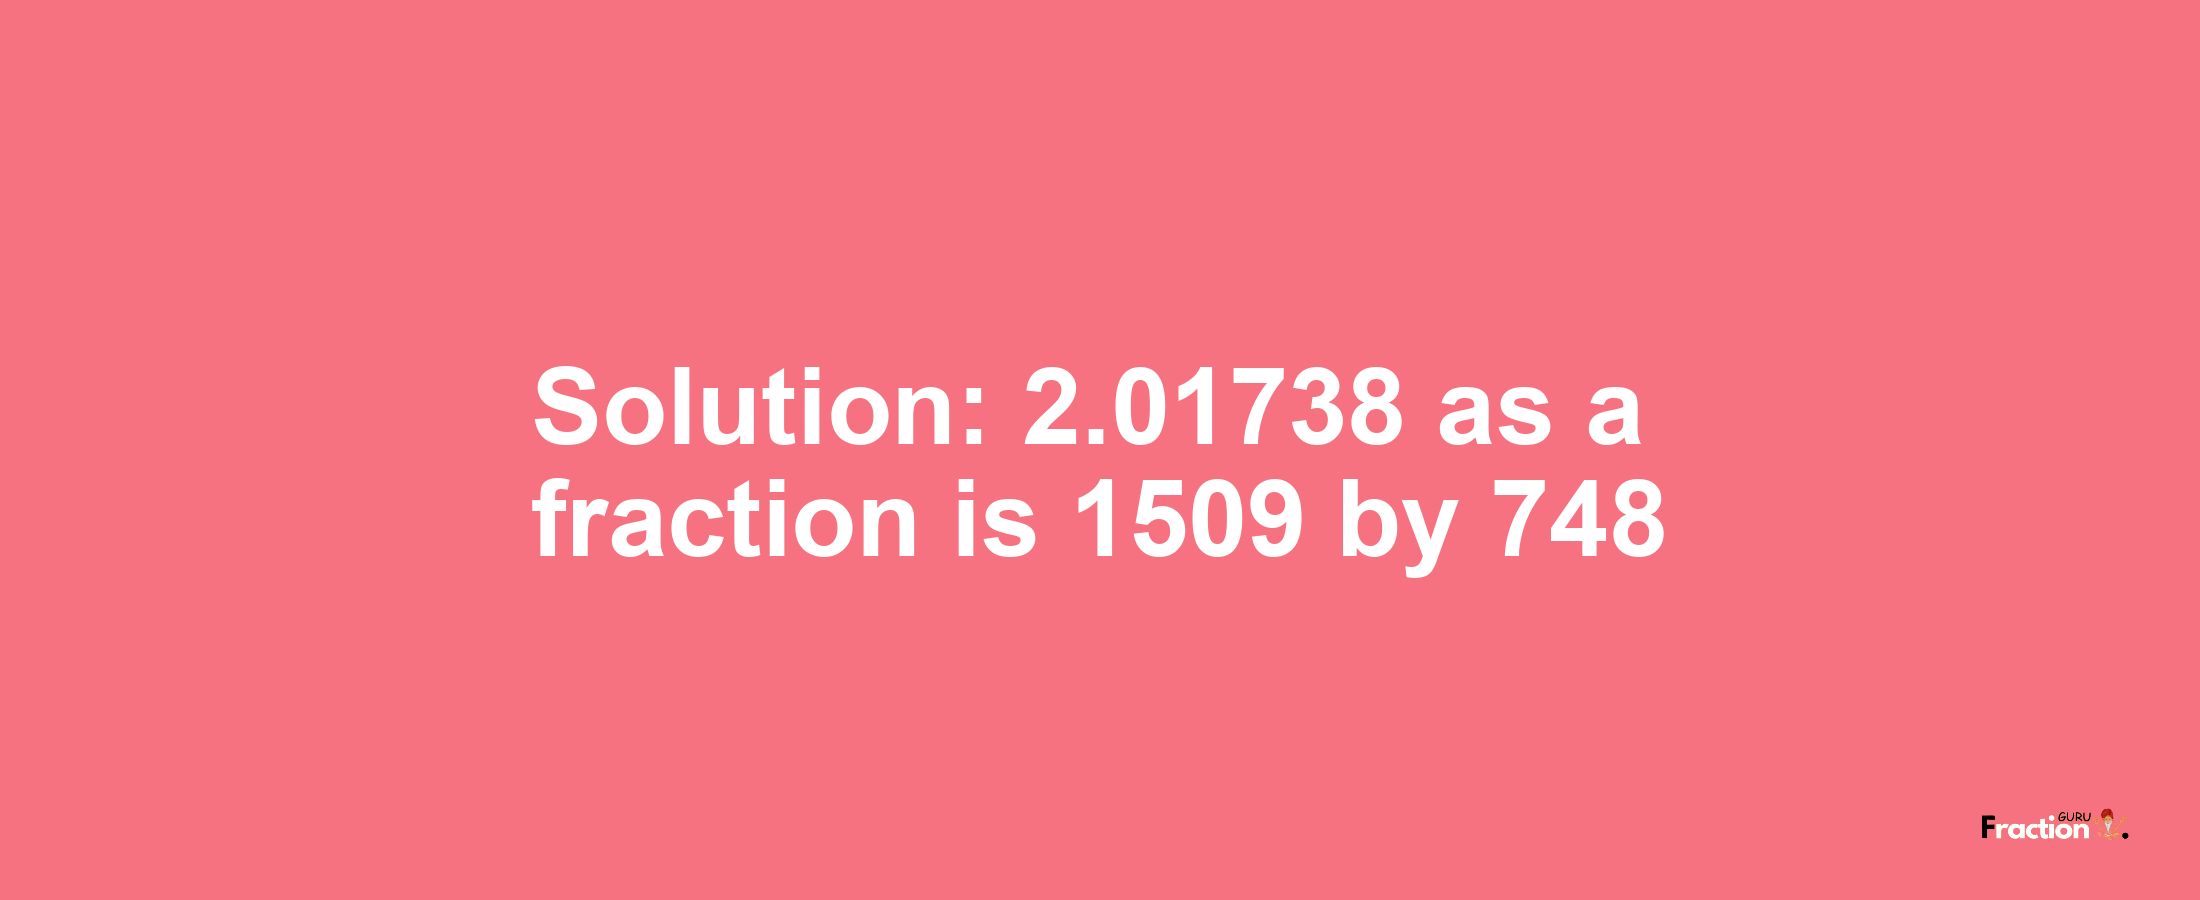 Solution:2.01738 as a fraction is 1509/748